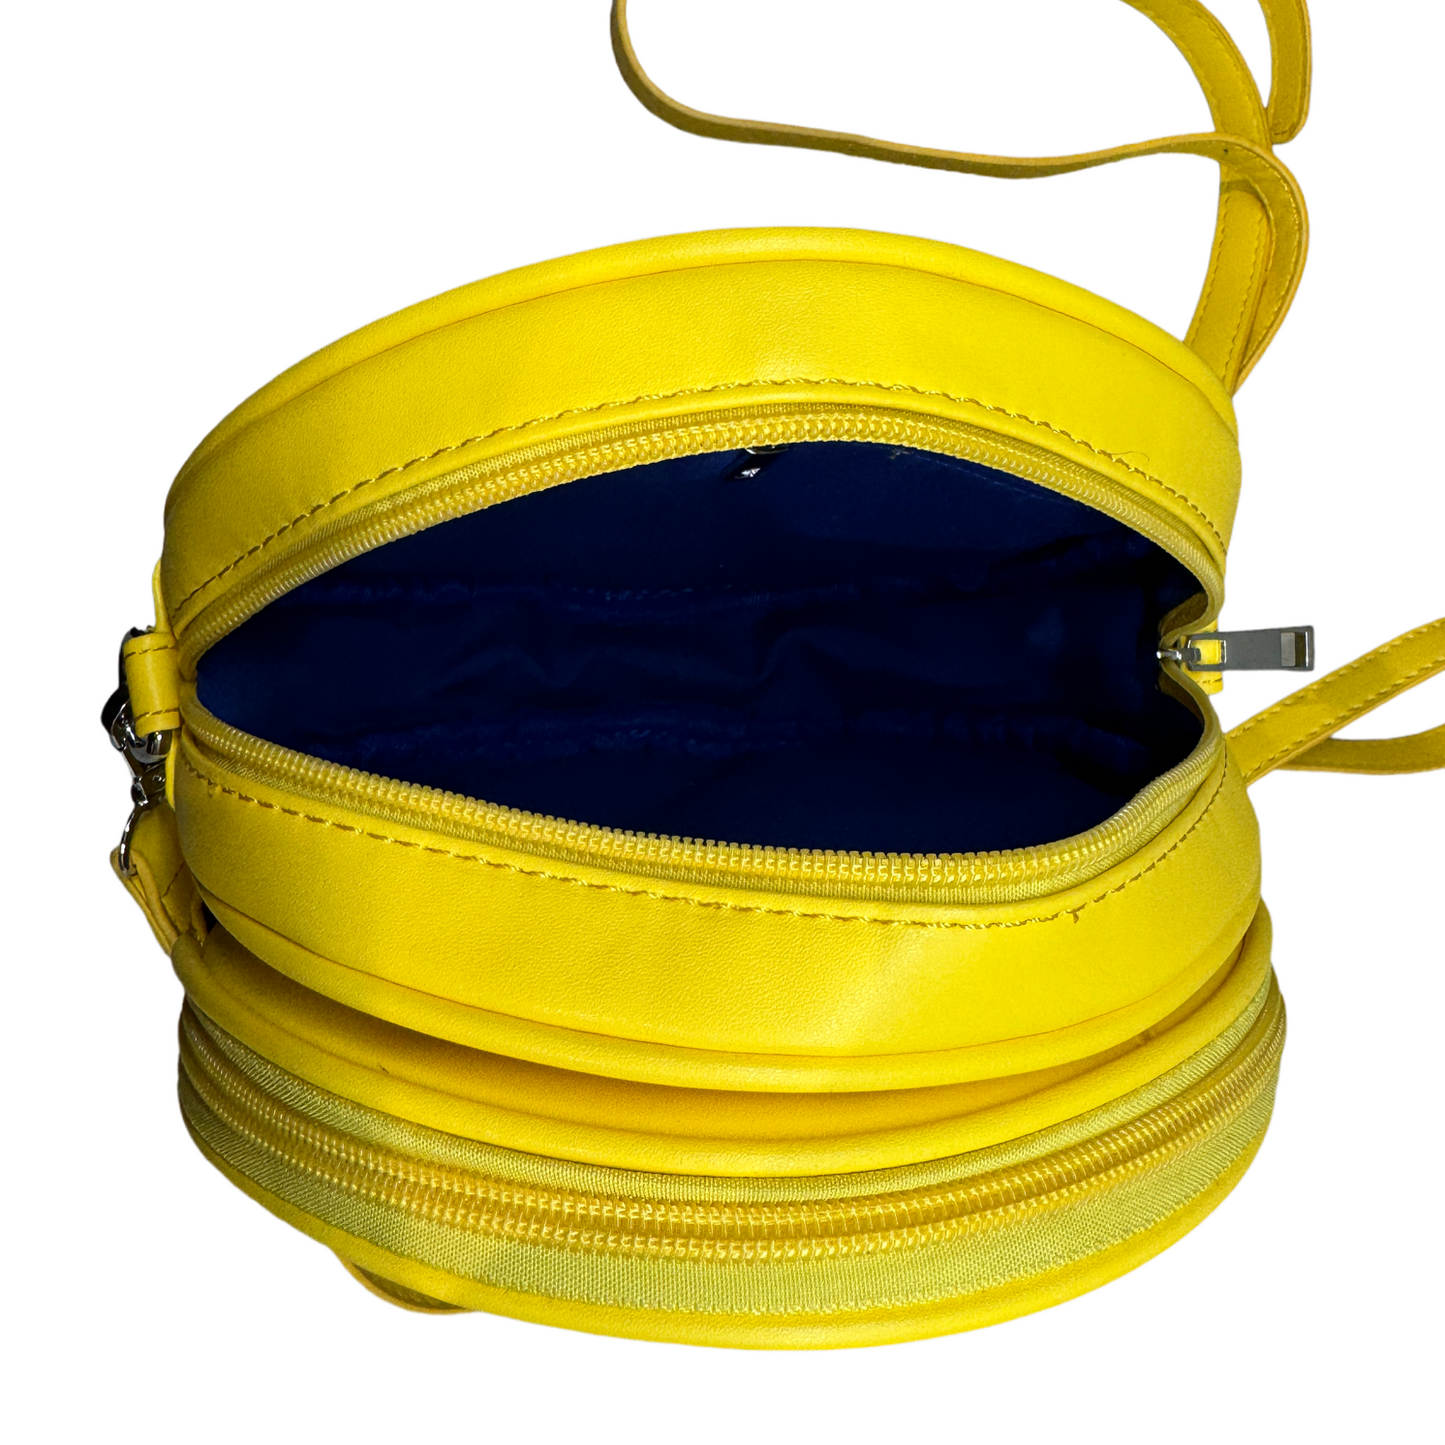 Park Day Cross Body - Tale as Old as Time Yellow & Blue